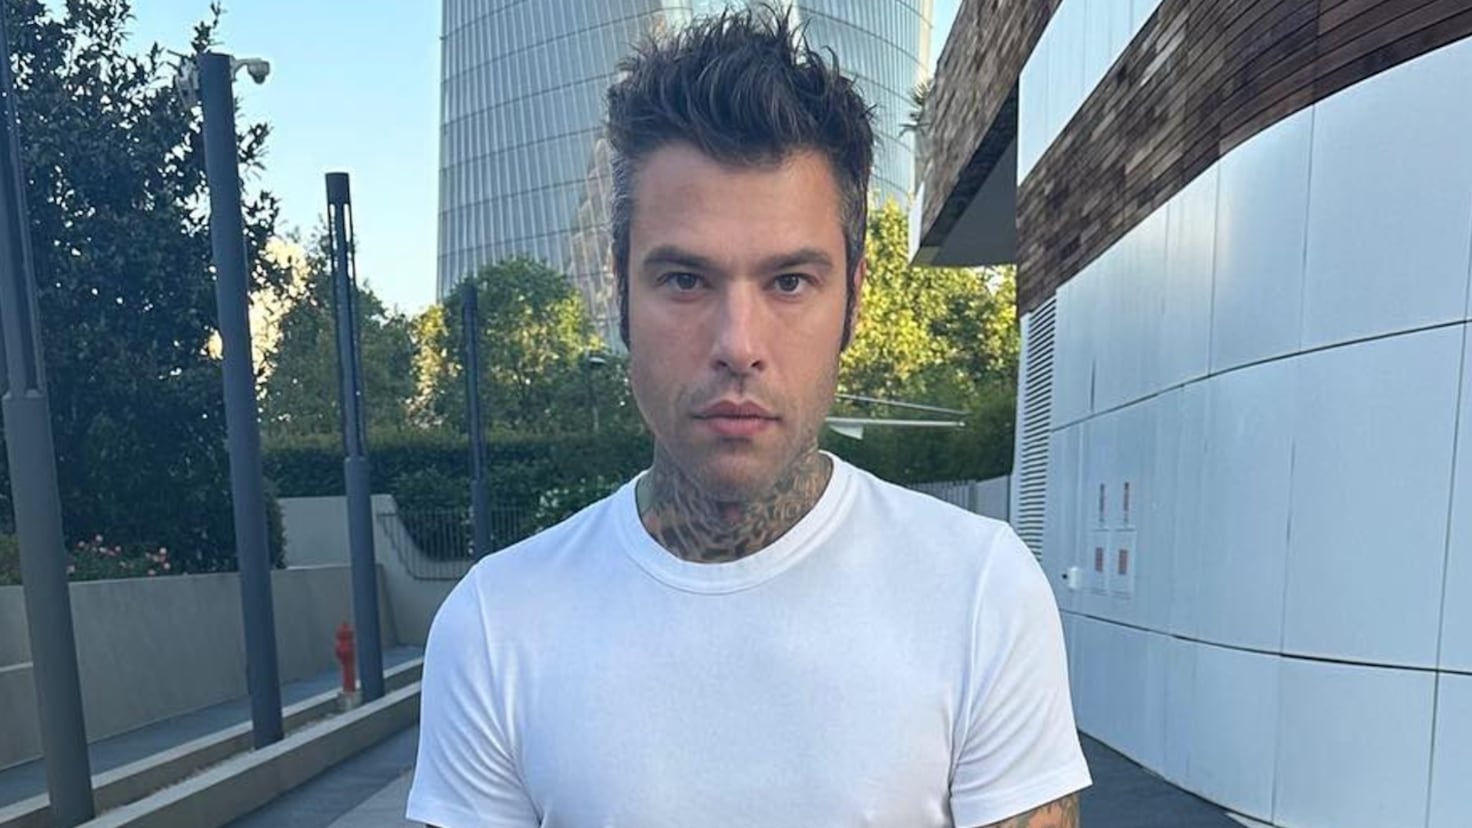 Fedez, reported for an alleged attack in a Milan nightclub
